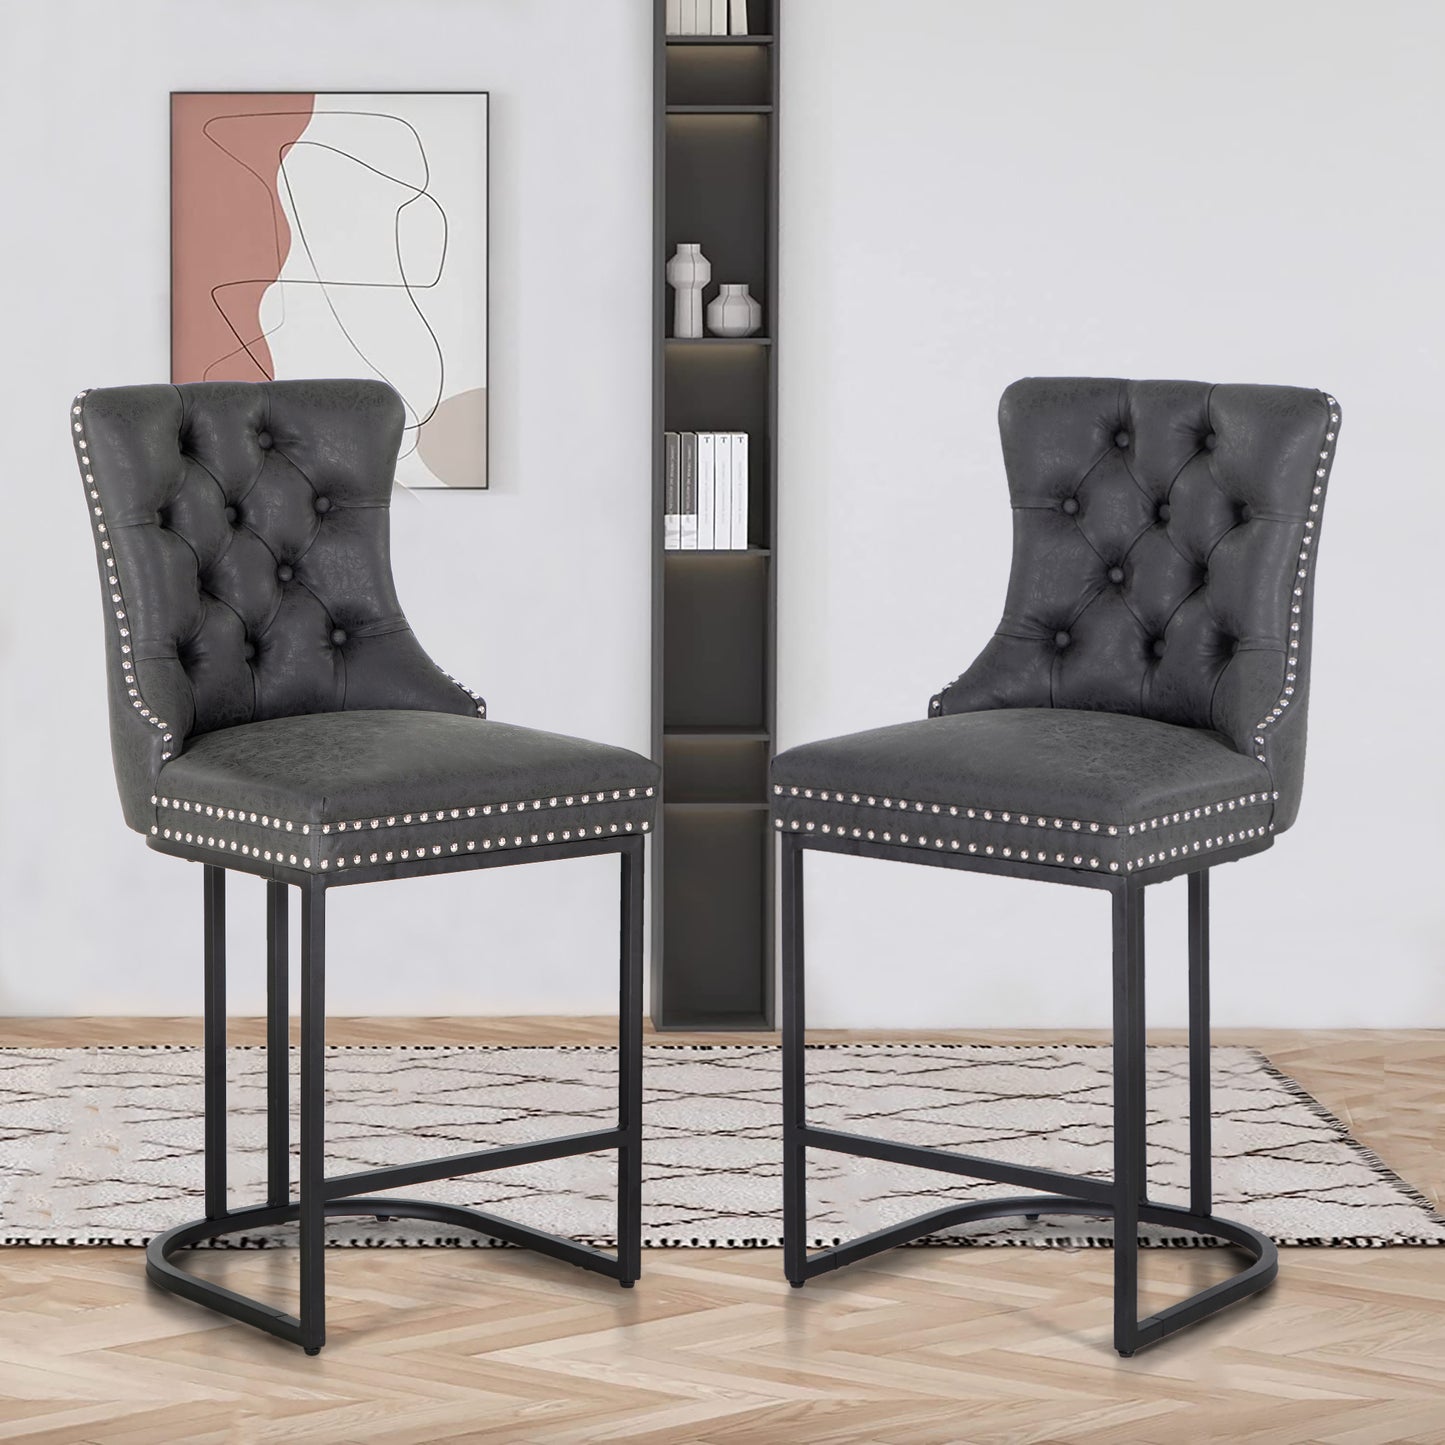 Sophia & William 26" Faux Leather Counter Height Bar Stool with Backrest-Set of 2-Black